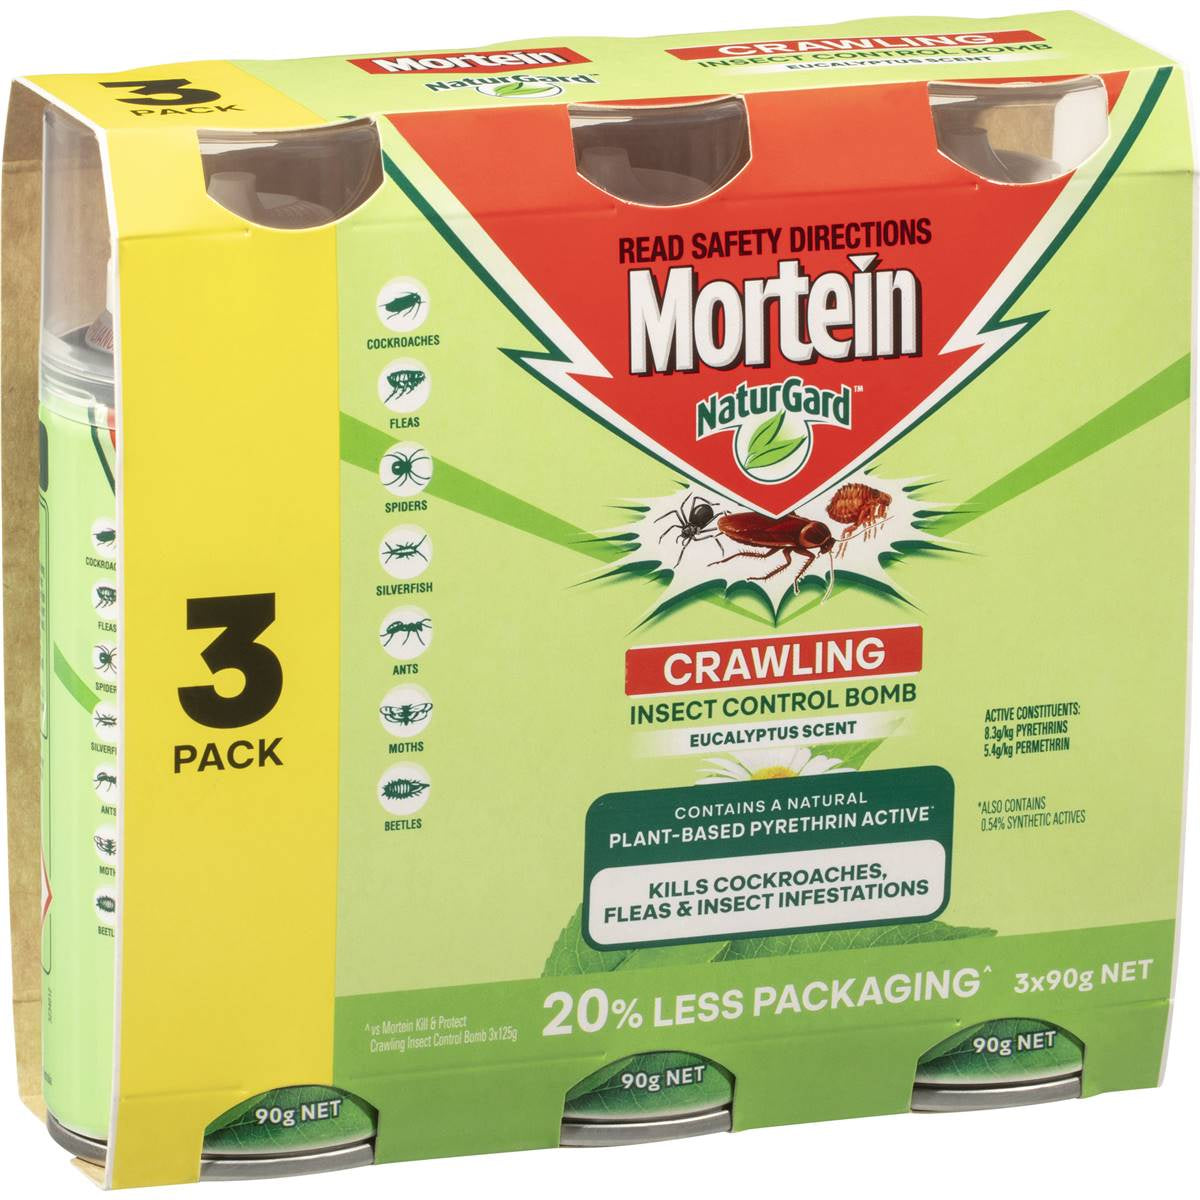 Mortein Naturgard Crawling Insect Control Bombs 3pk